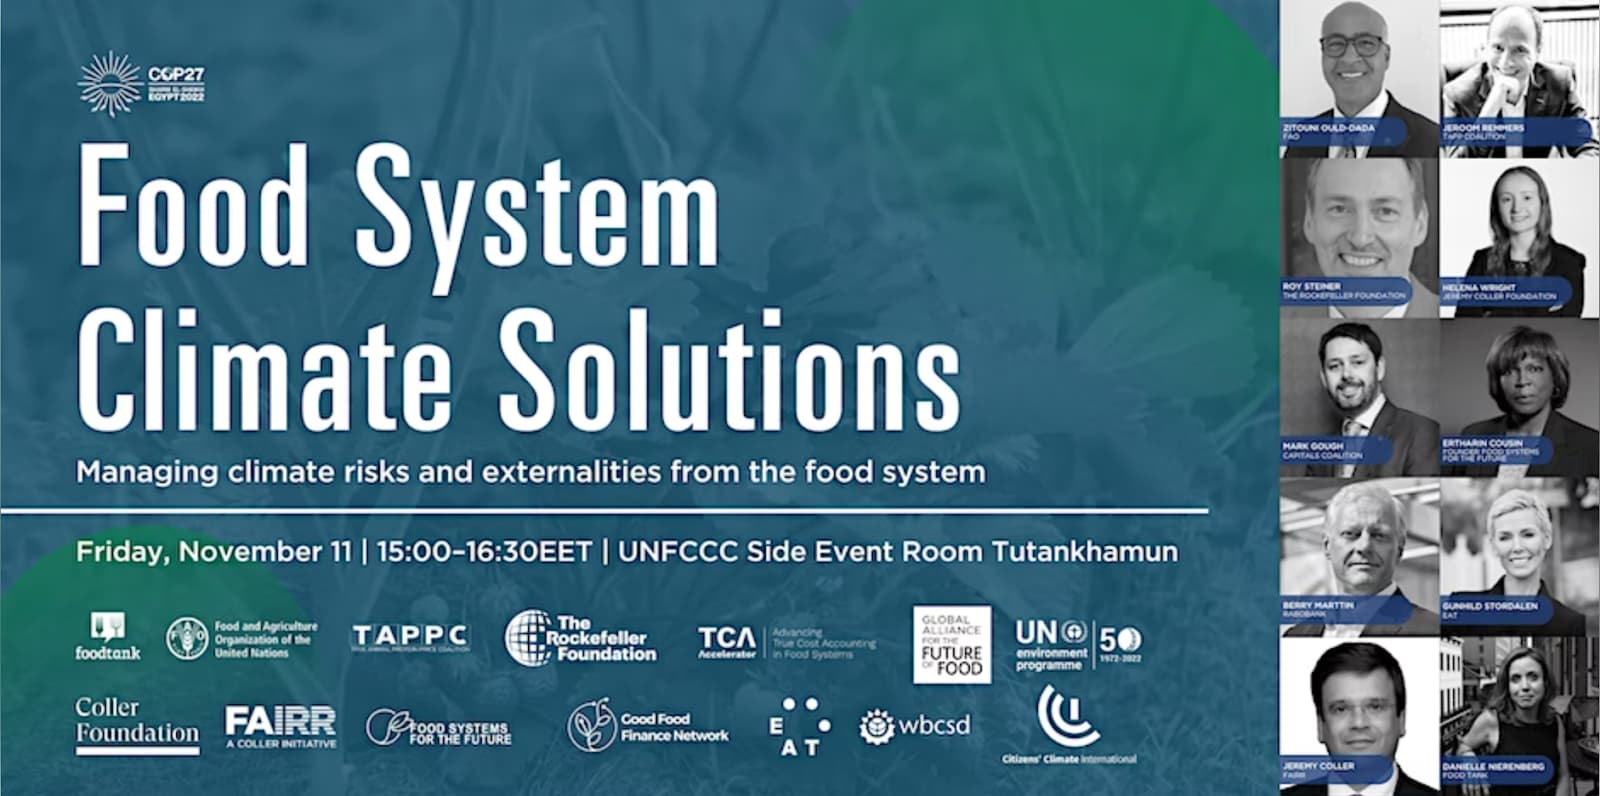 Food System Climate Solutions: Managing Climate Risks and Externalities from the Food System